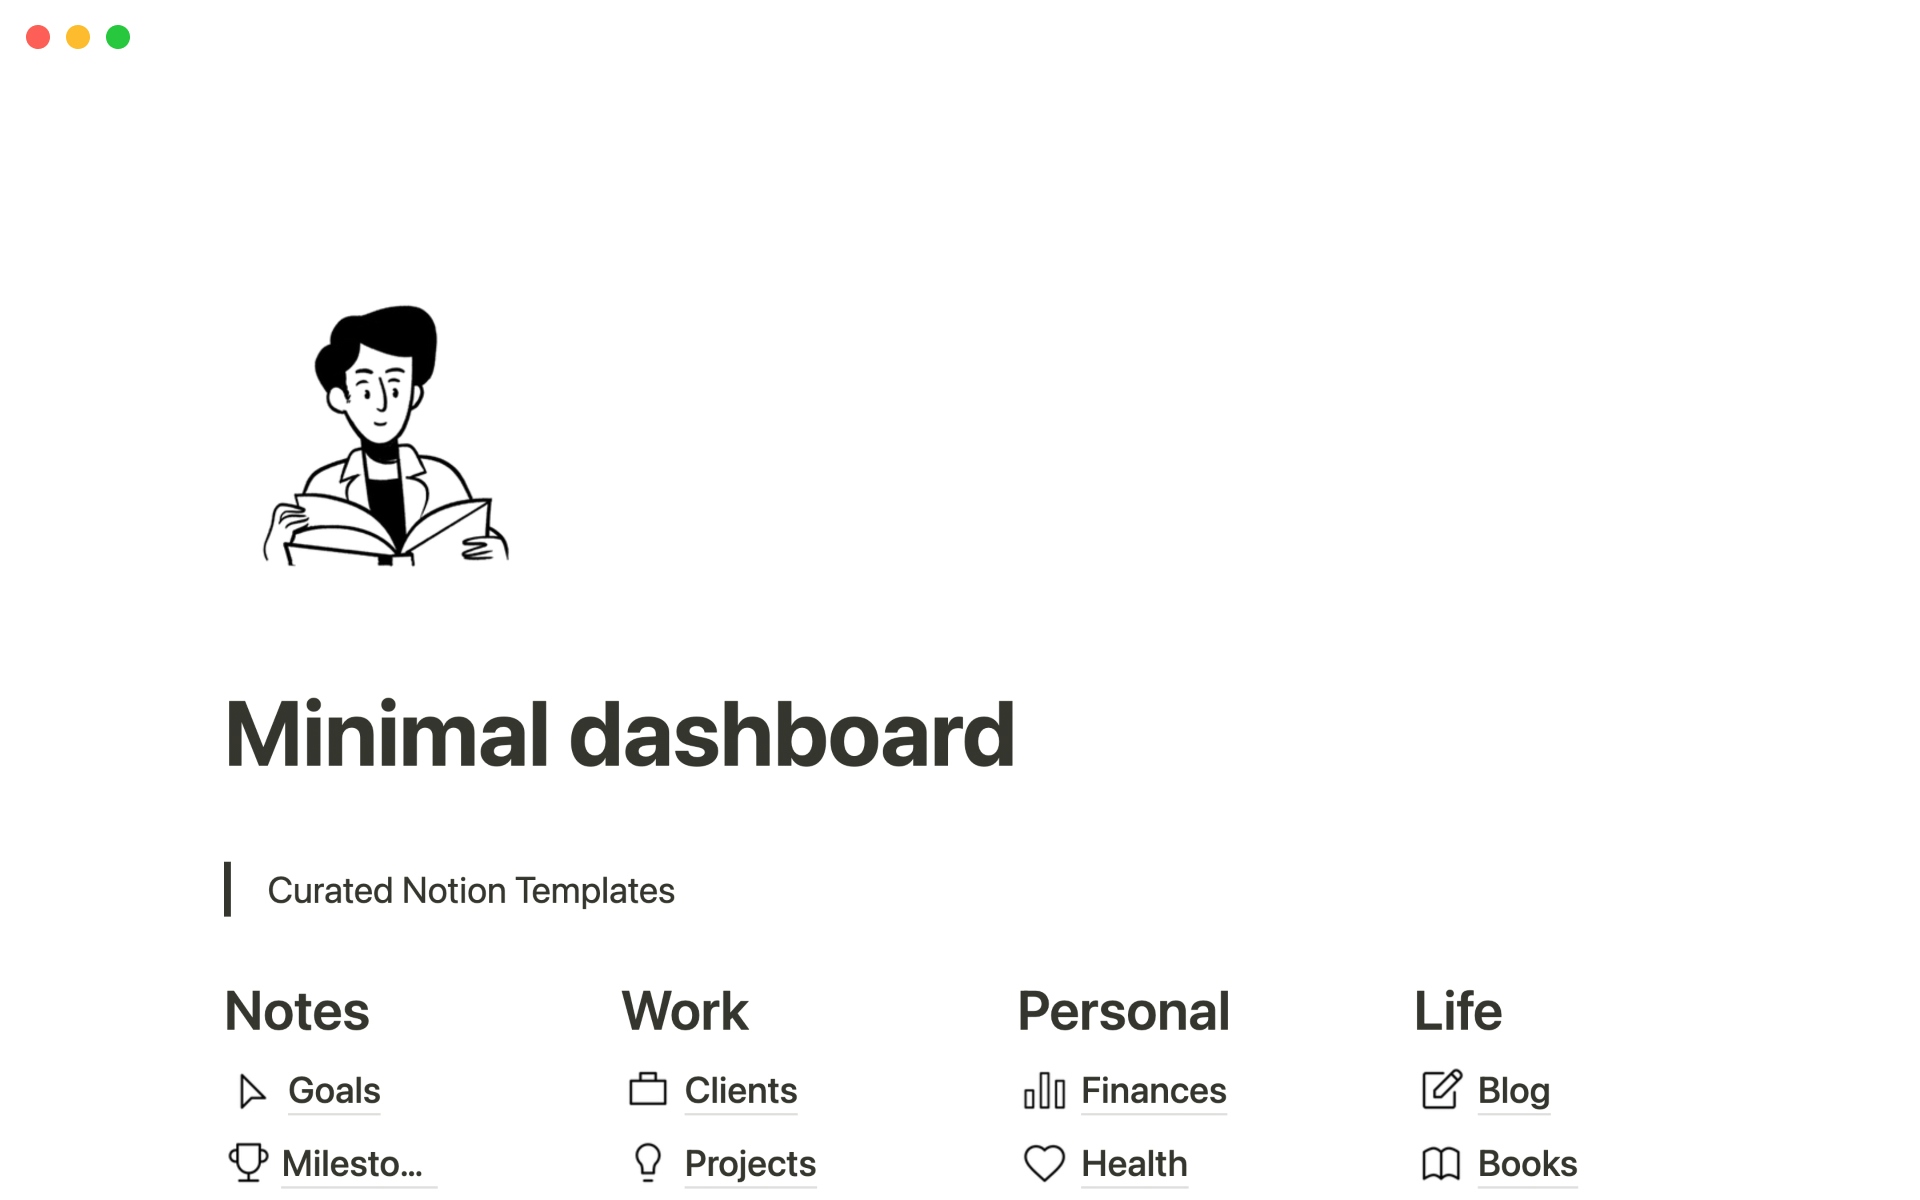 The desktop image for the Minimal dashboard template